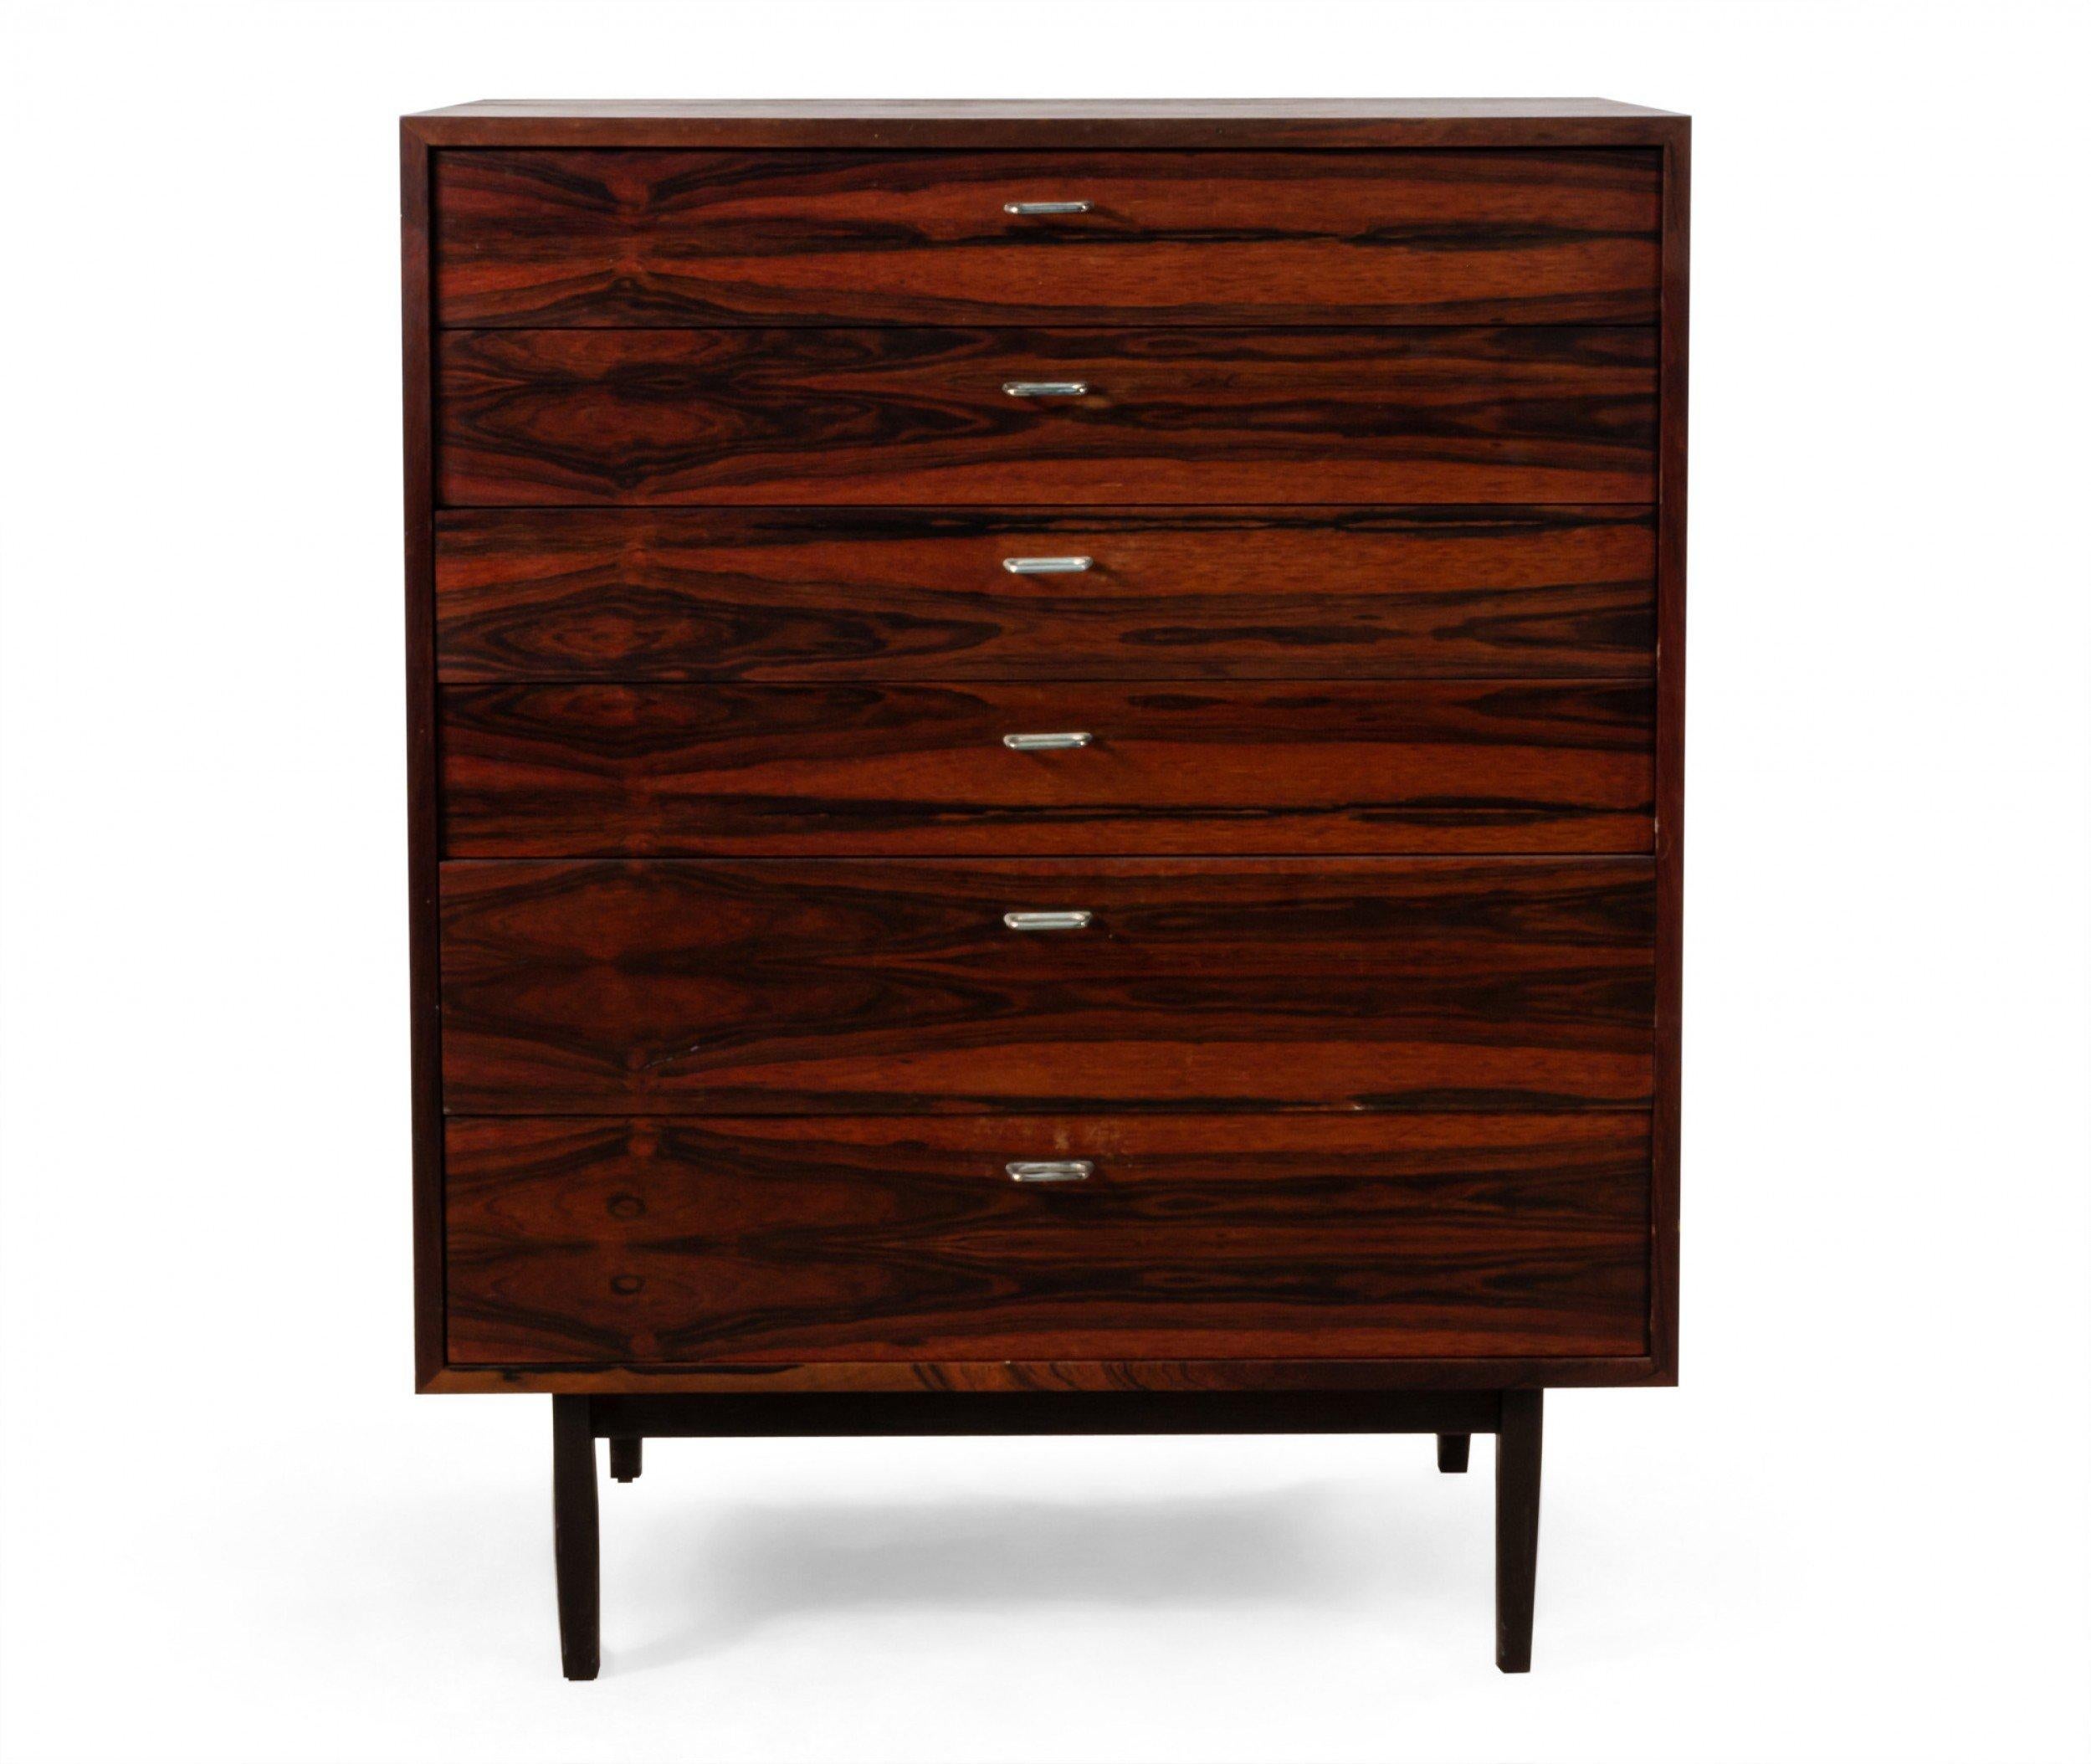 Danish mid-century high chest with 6 drawers, tapered legs, and silver metal drawer pulls.
  